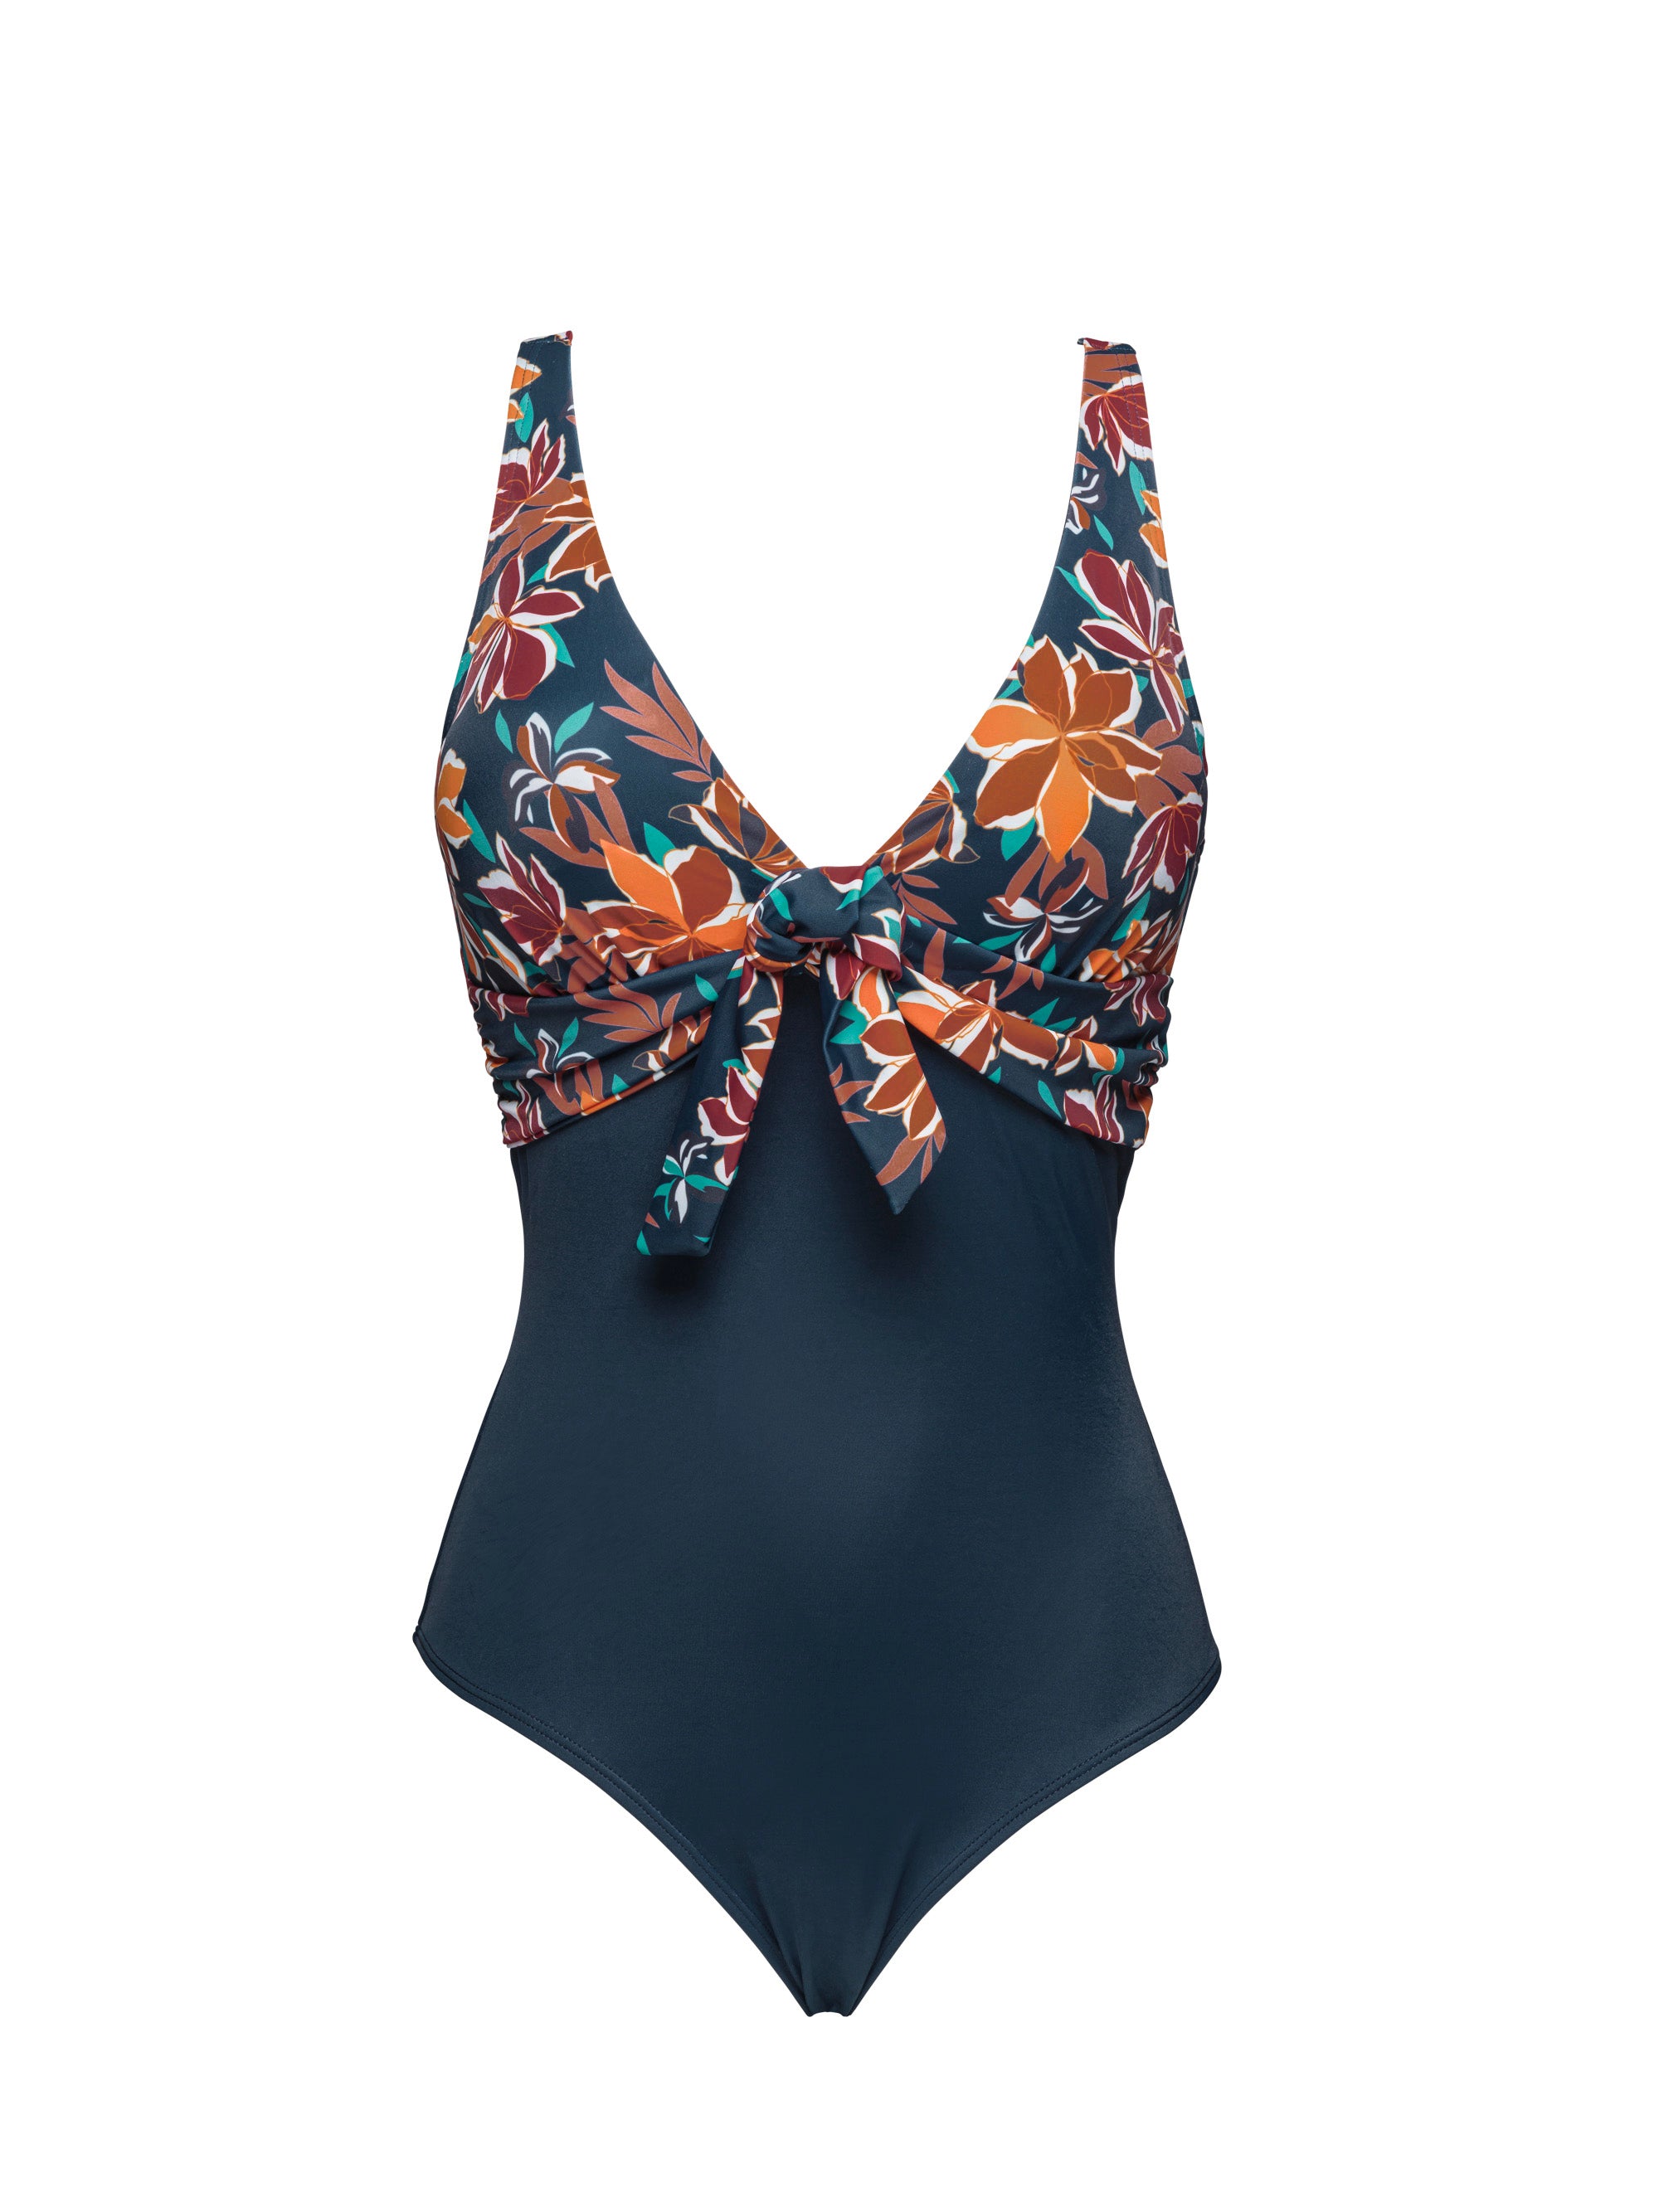 Wireless one piece swimsuit Staycation Blue Floral Print